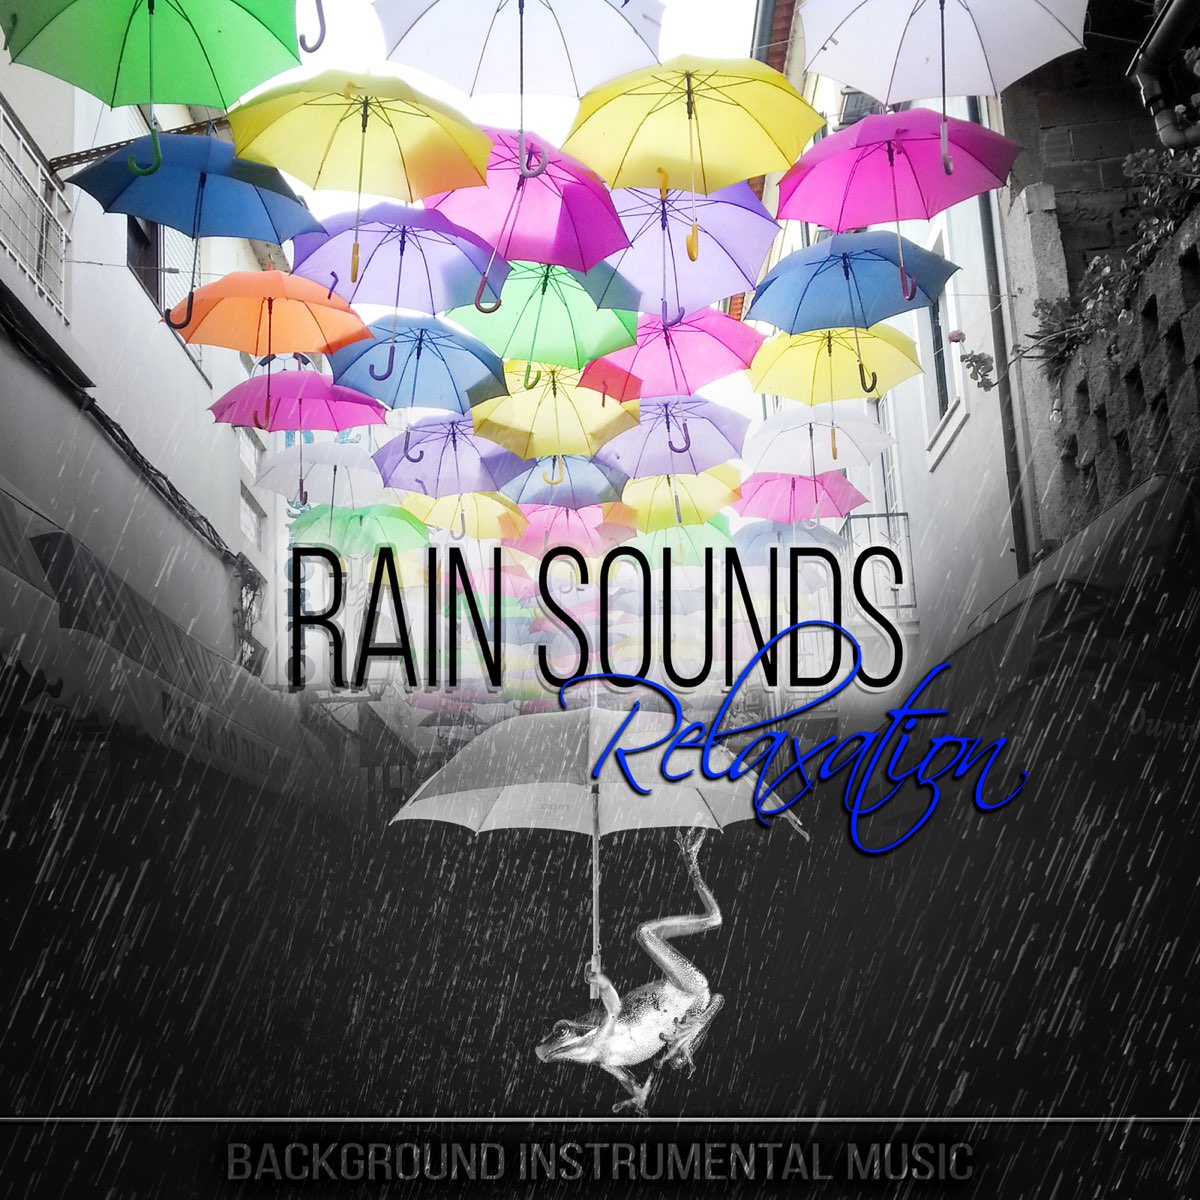 Rain Sounds Relaxation – Raindrops with Background Instrumental Music for  Relax, Deep Sleep, Meditation, Massage, Yoga, Reiki & Stress Relief by Deep  Sleep Music Maestro on Apple Music